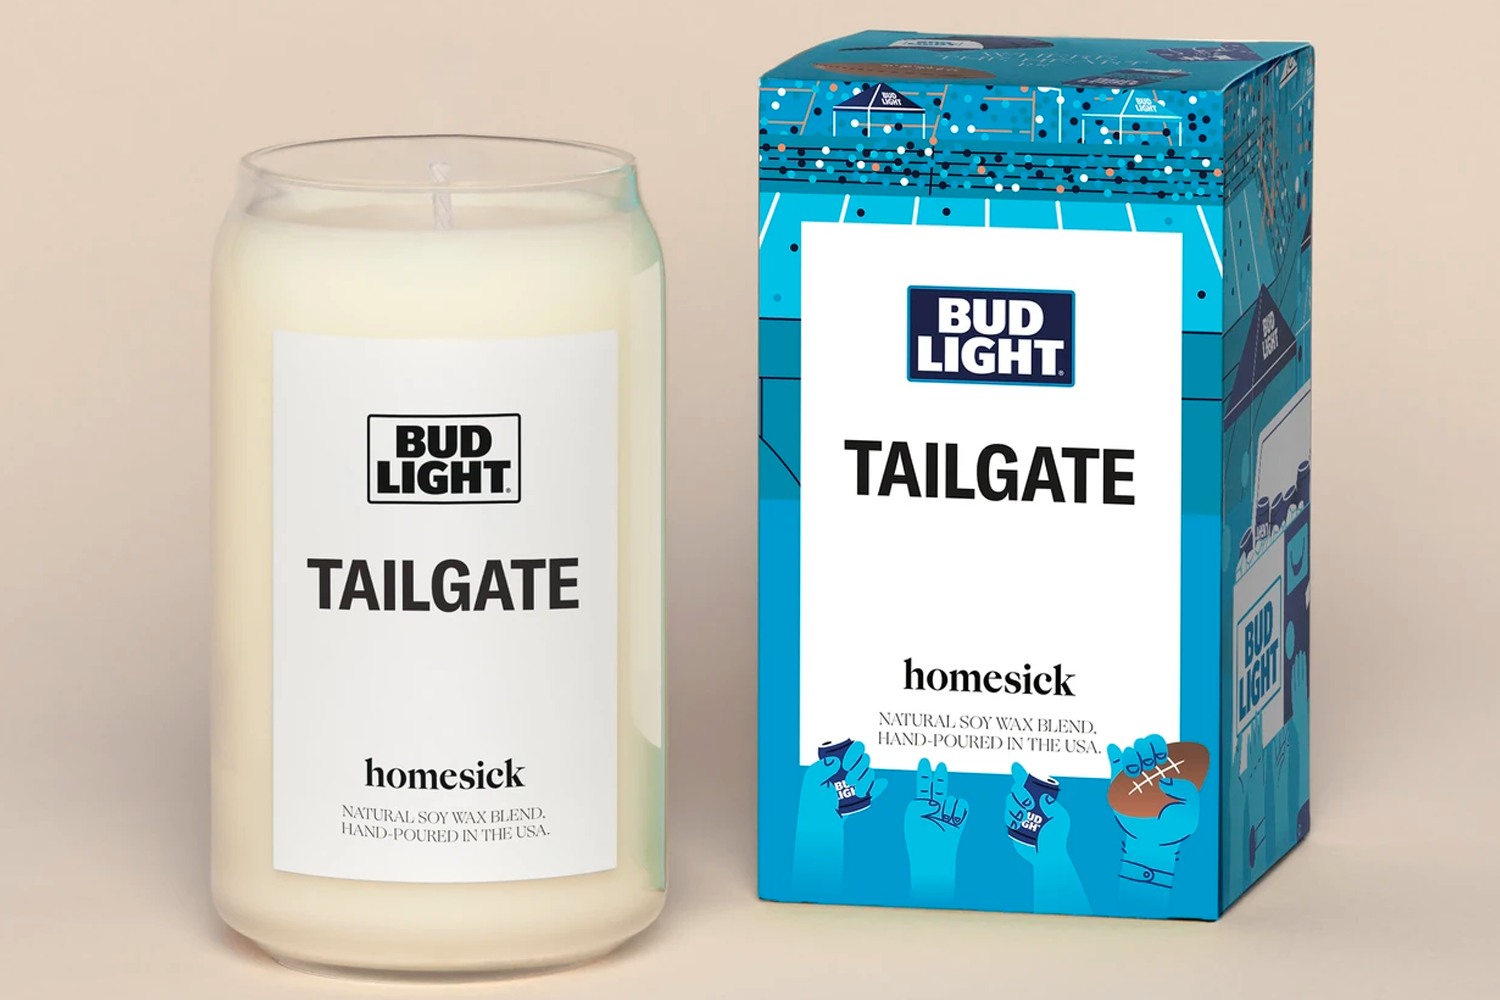 Bud Light tailgate candle